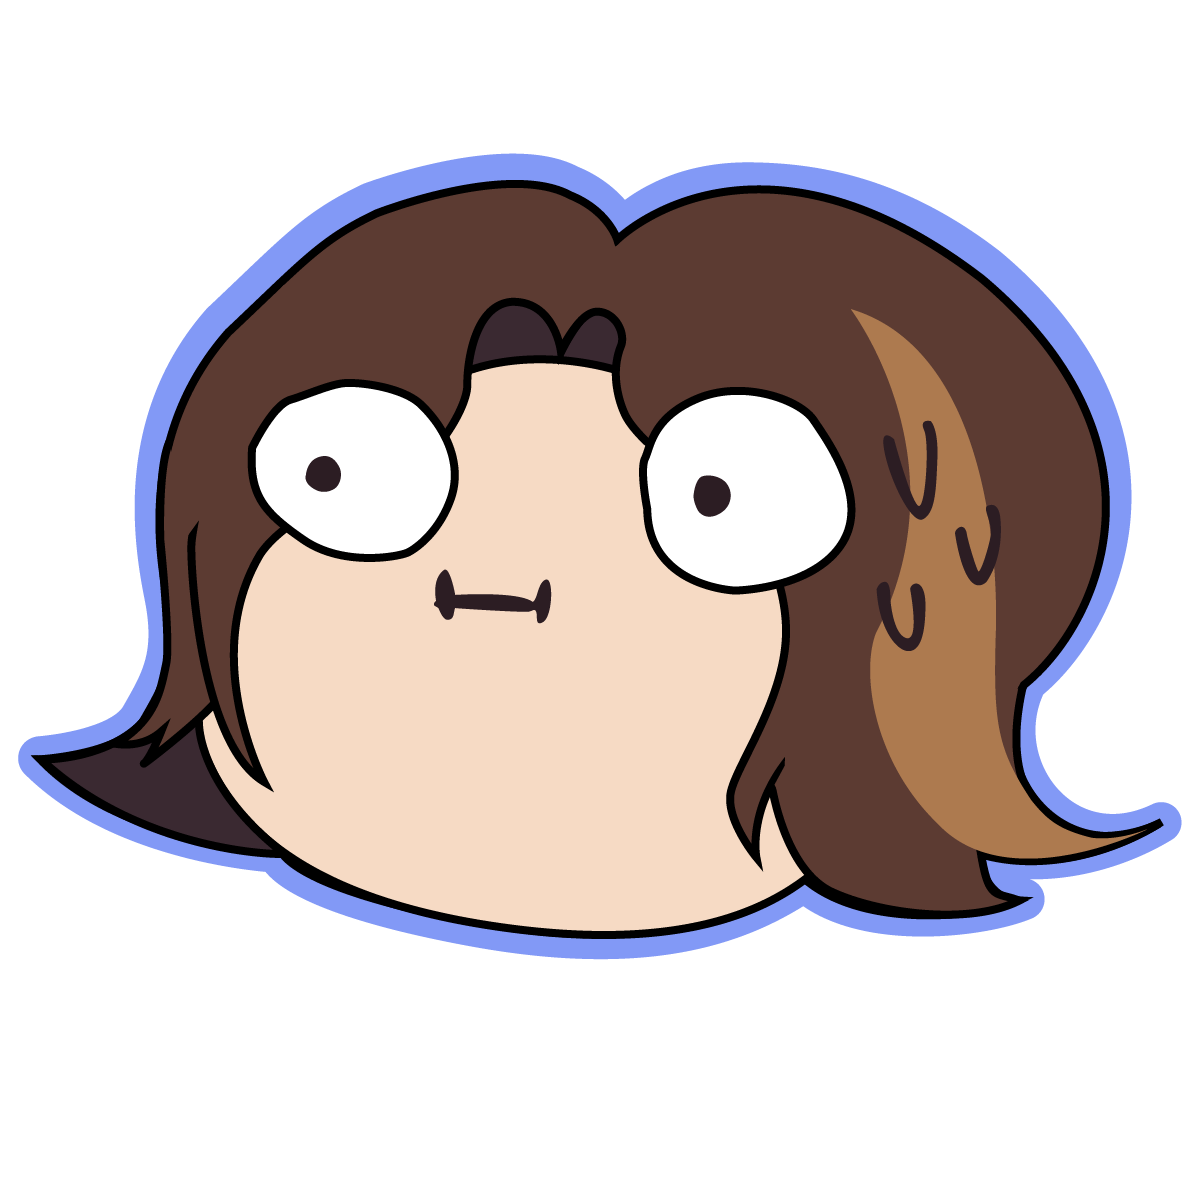 Image - Arin Nervous.png | Game Grumps Wiki | FANDOM powered by Wikia